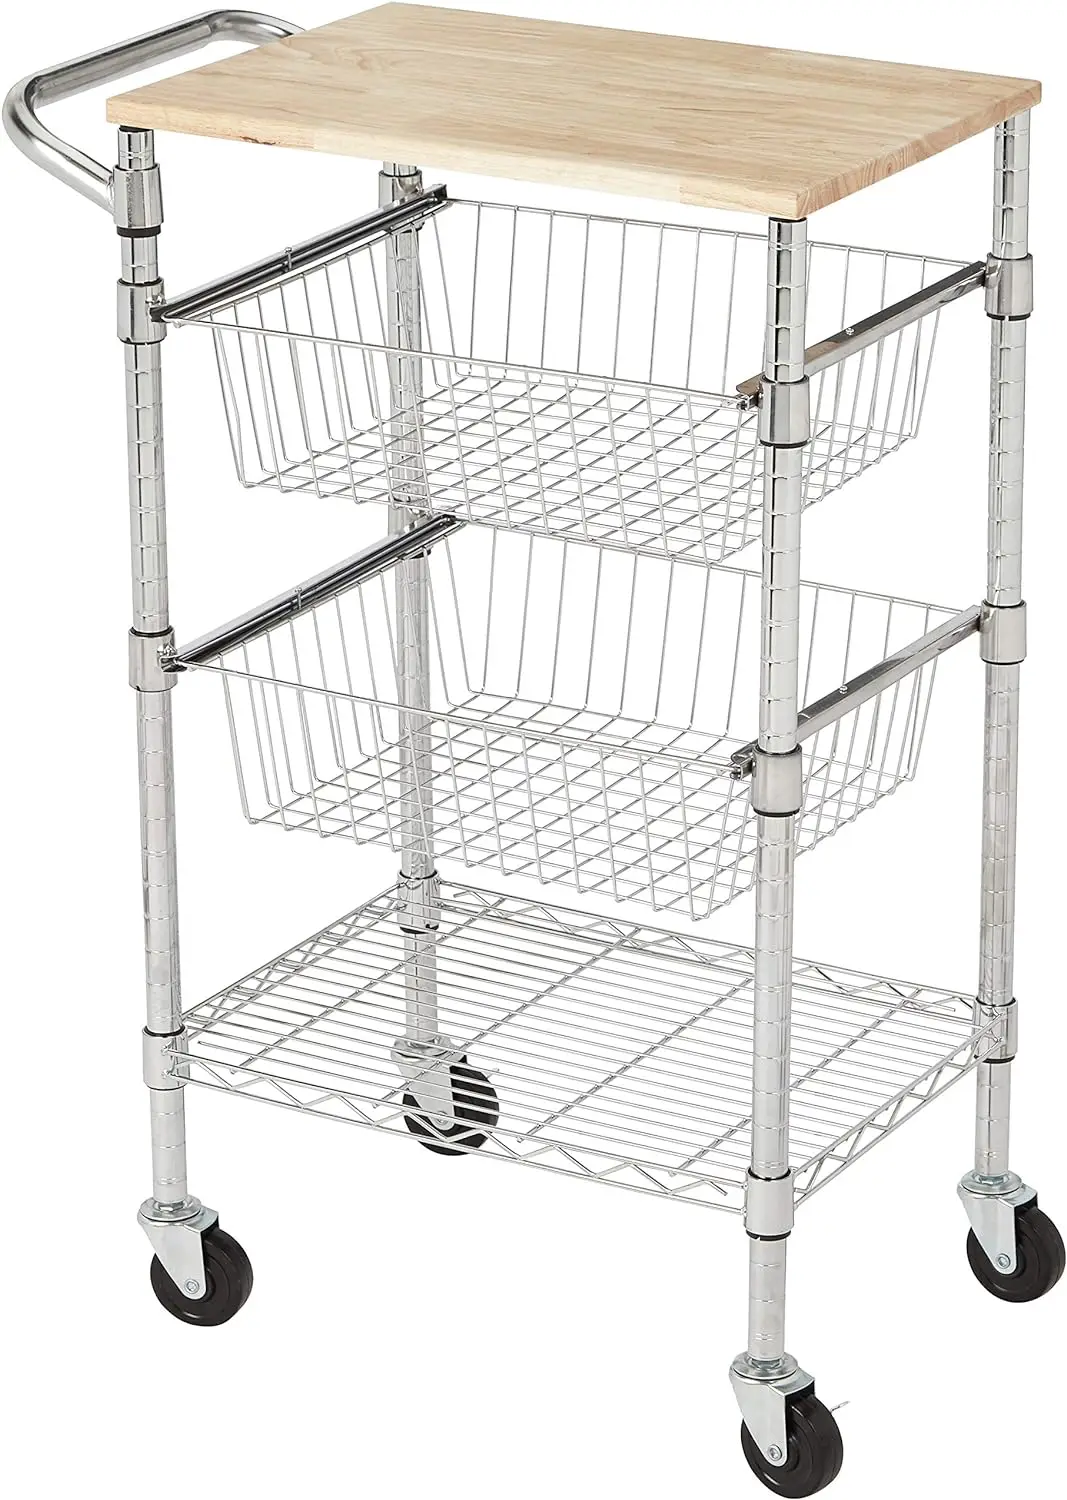 basics-3-tier-metal-basket-rolling-cart-with-wood-top-silver